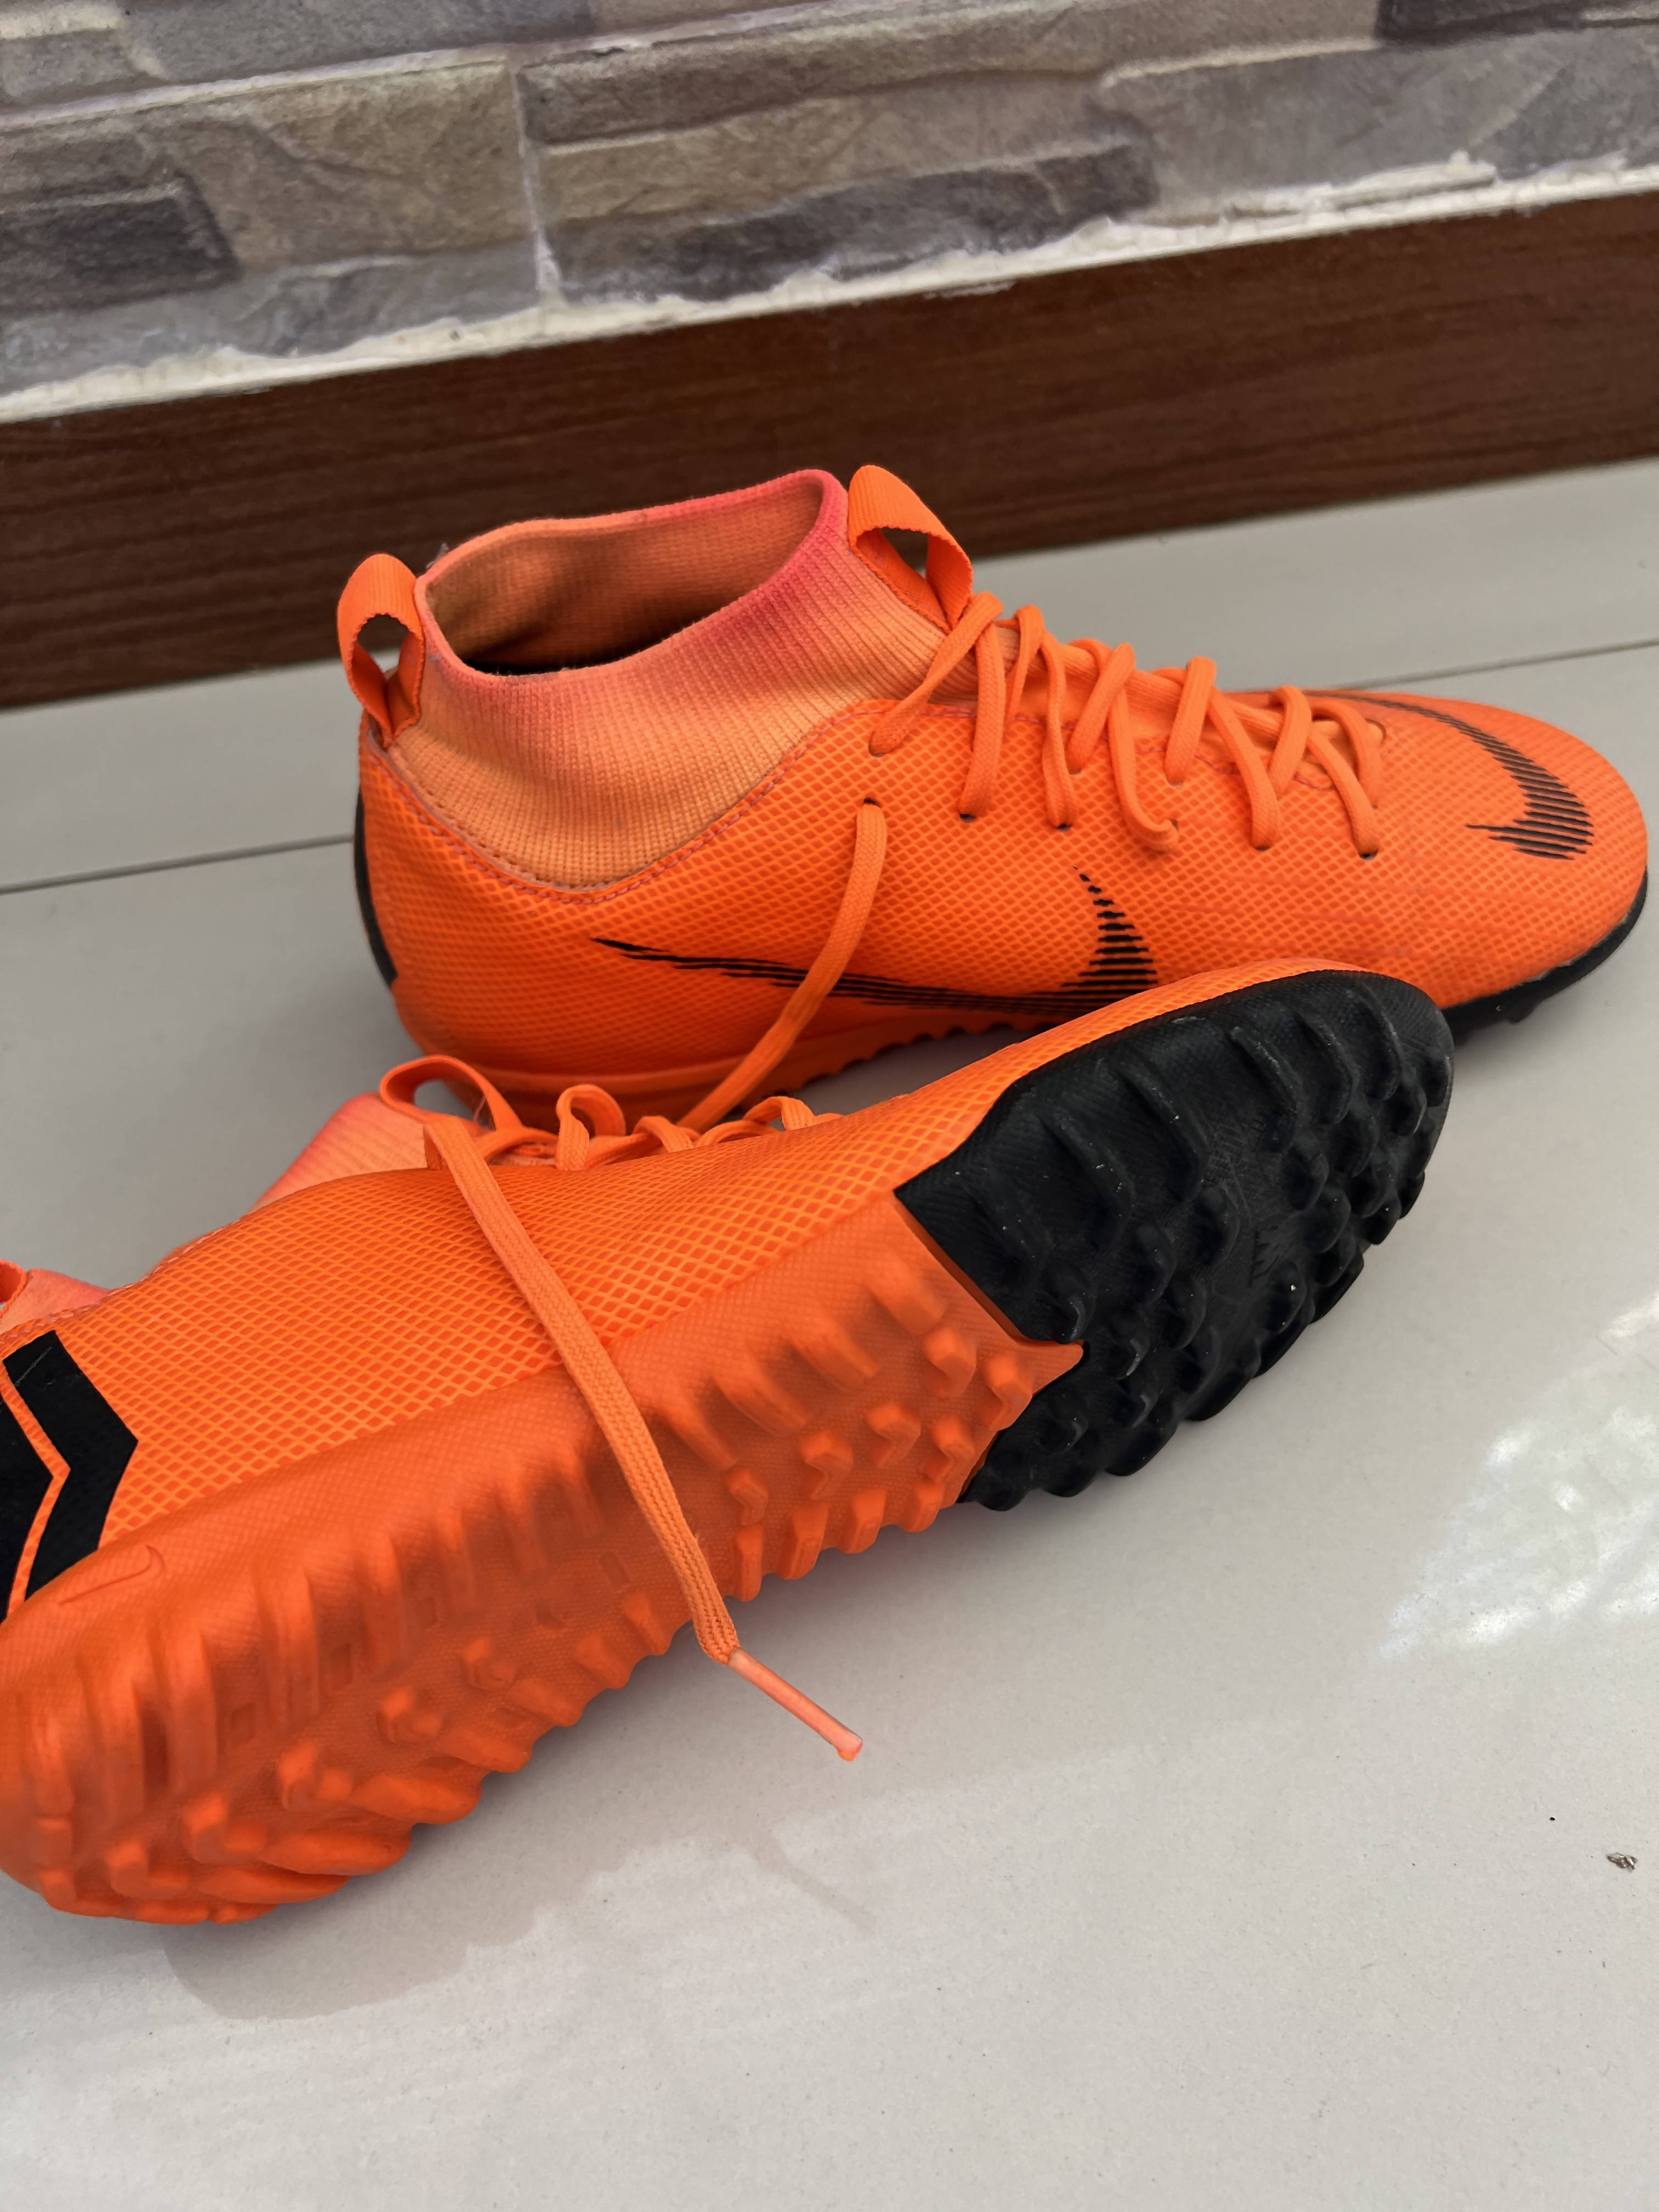 Nike | Orange grippers shoes | Men Shoes | New